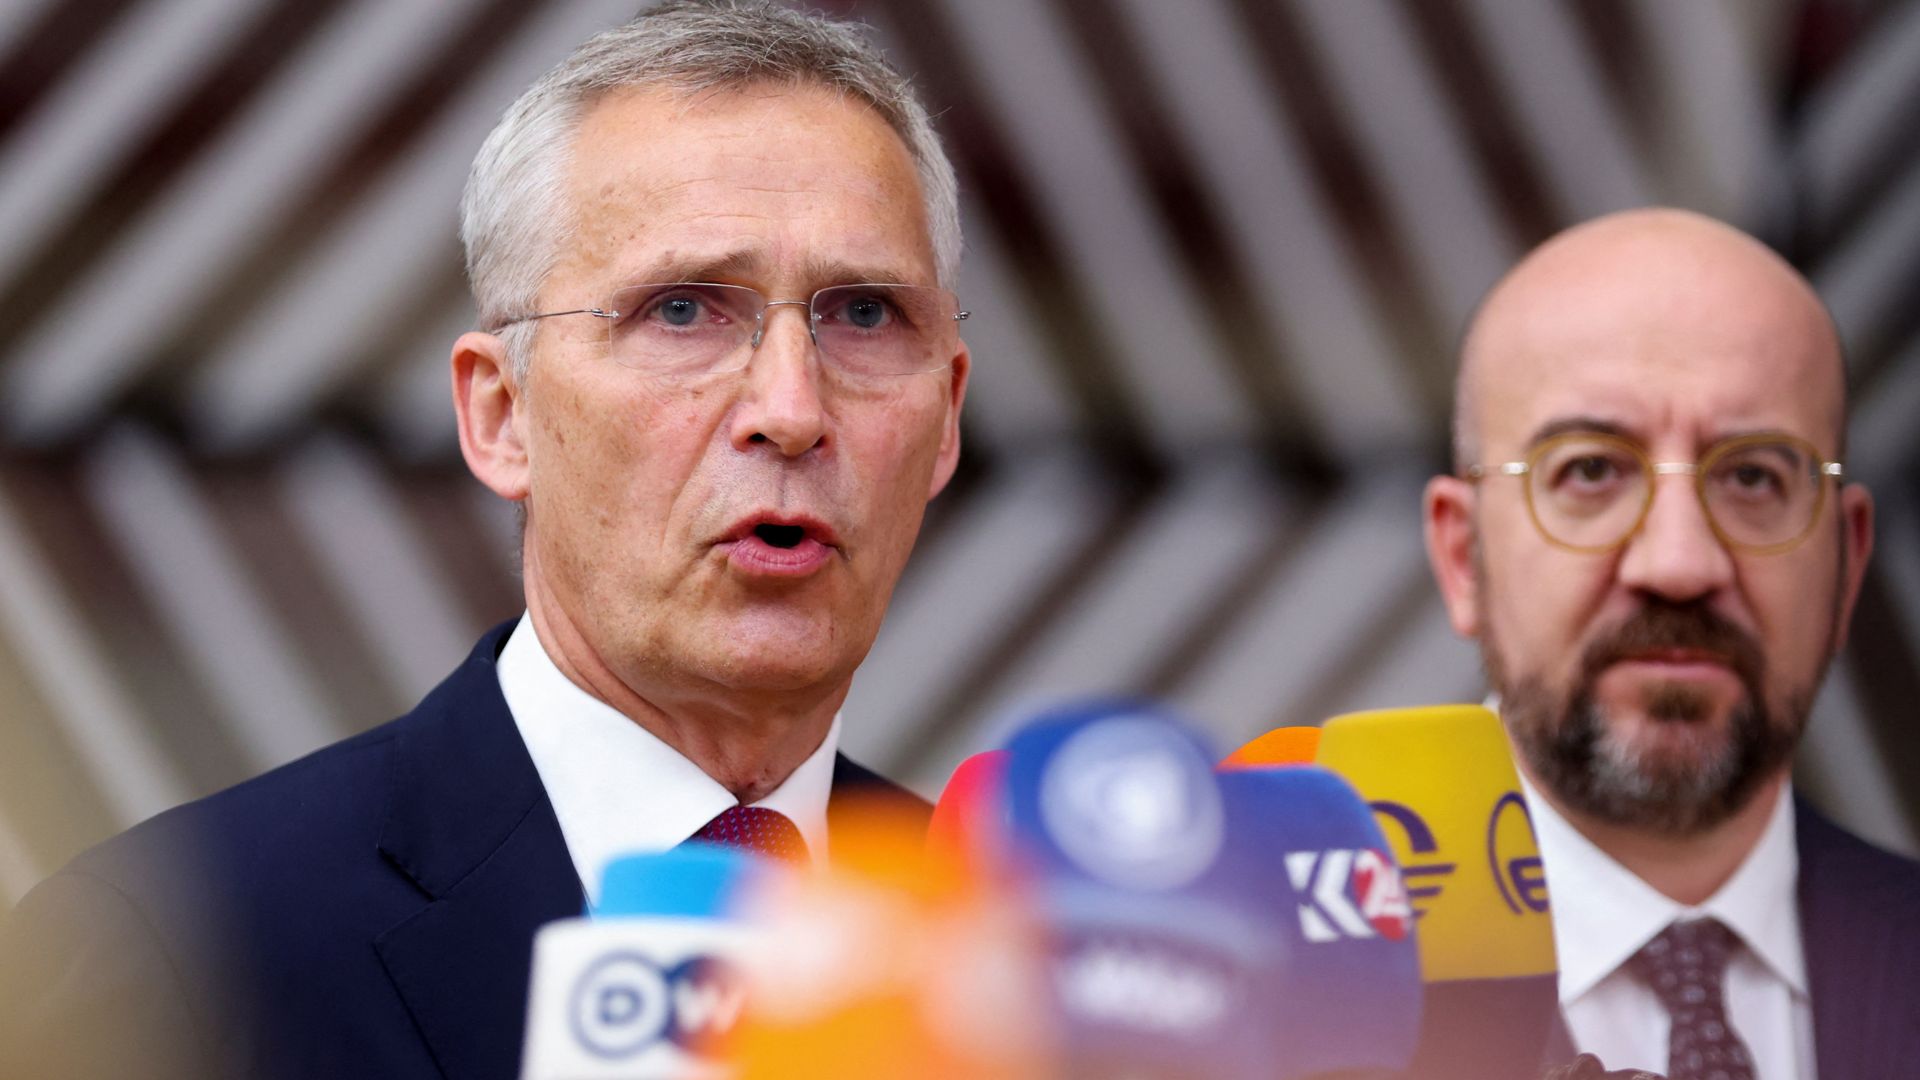 NATO Secretary General Jens Stoltenberg and Charles Michel, the President of the European Council at the EU leaders' summit. /Johanna Geron/Reuters